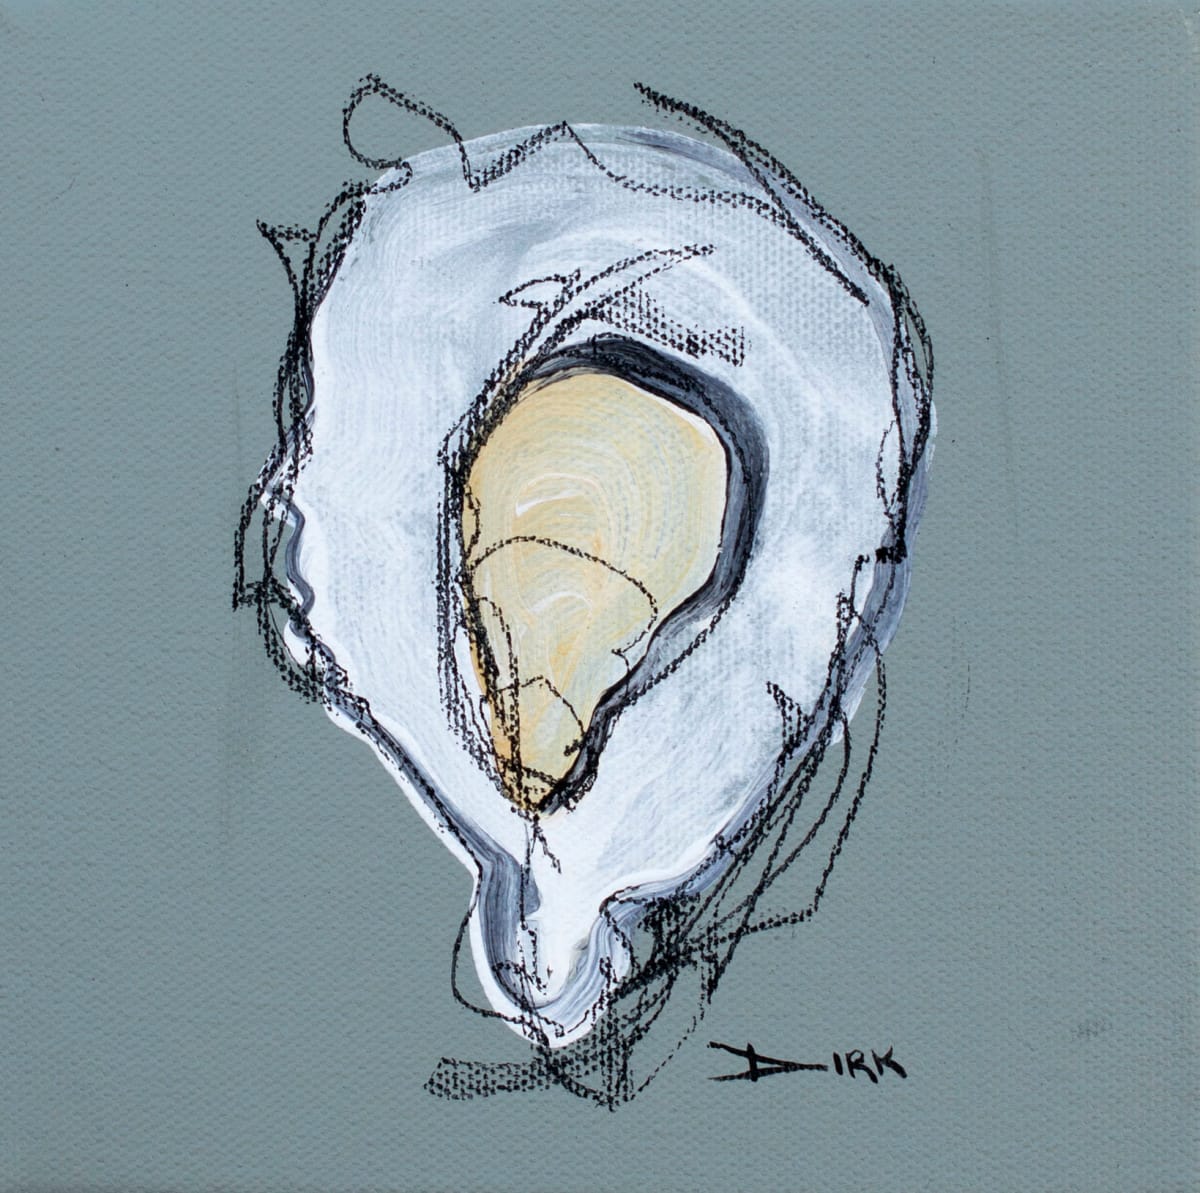 Oyster on canvas #5 by Dirk Guidry 